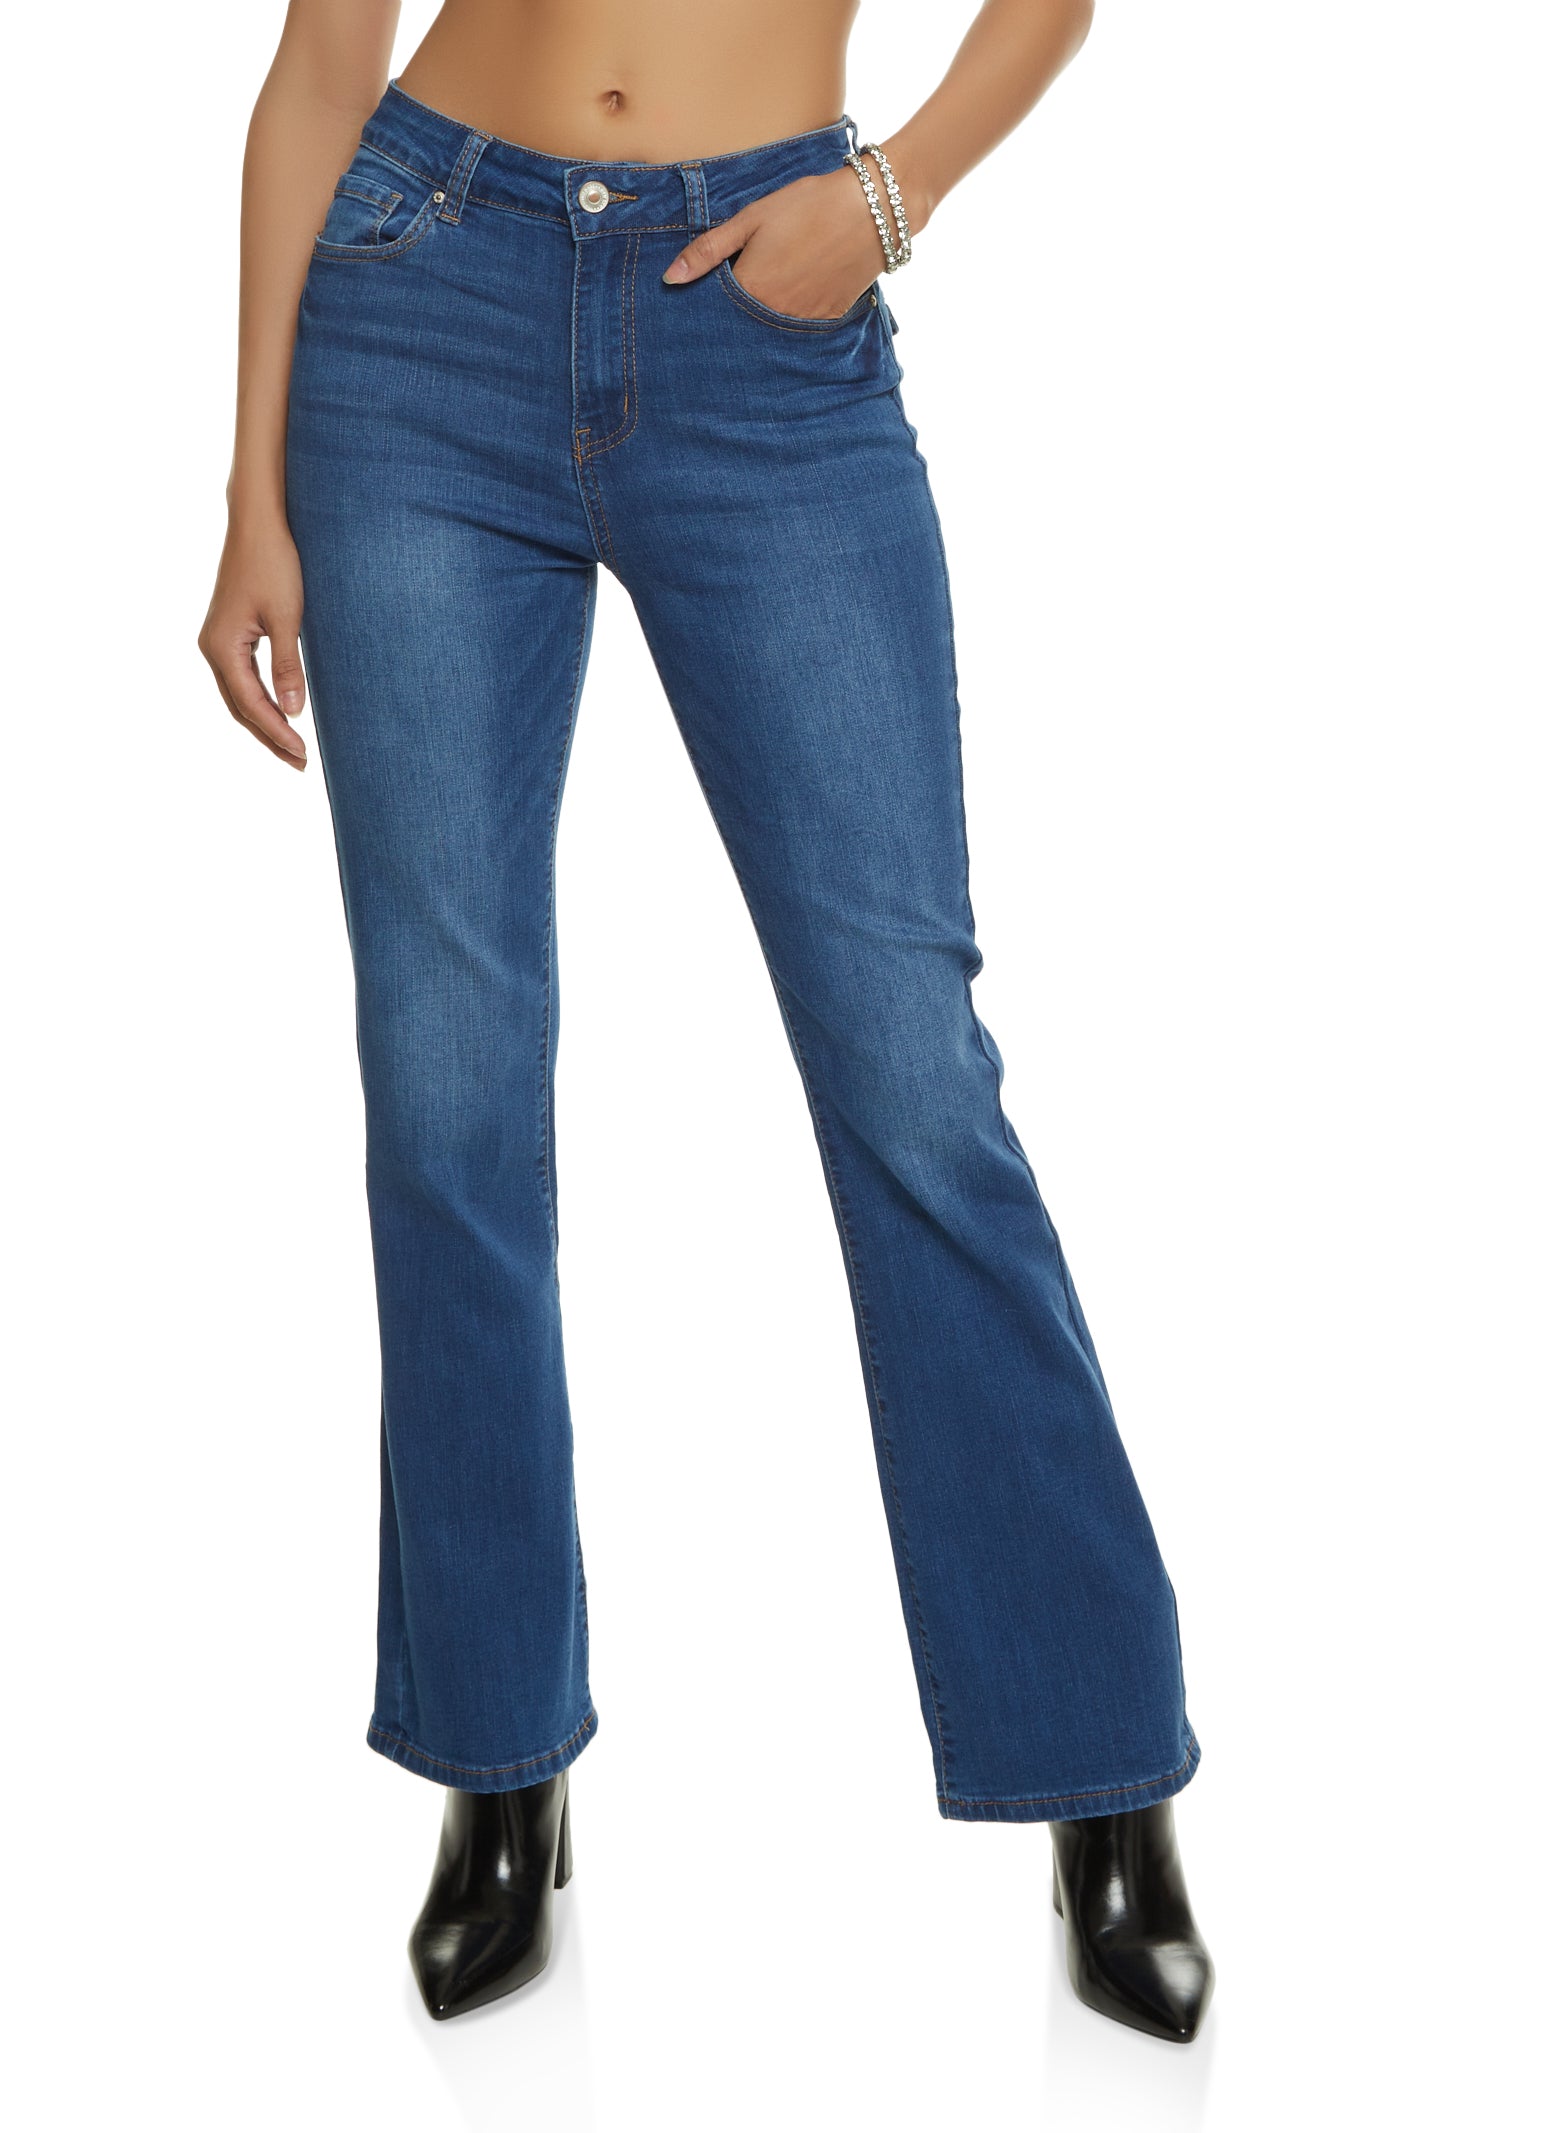 WAX Whiskered Boot Cut Jeans